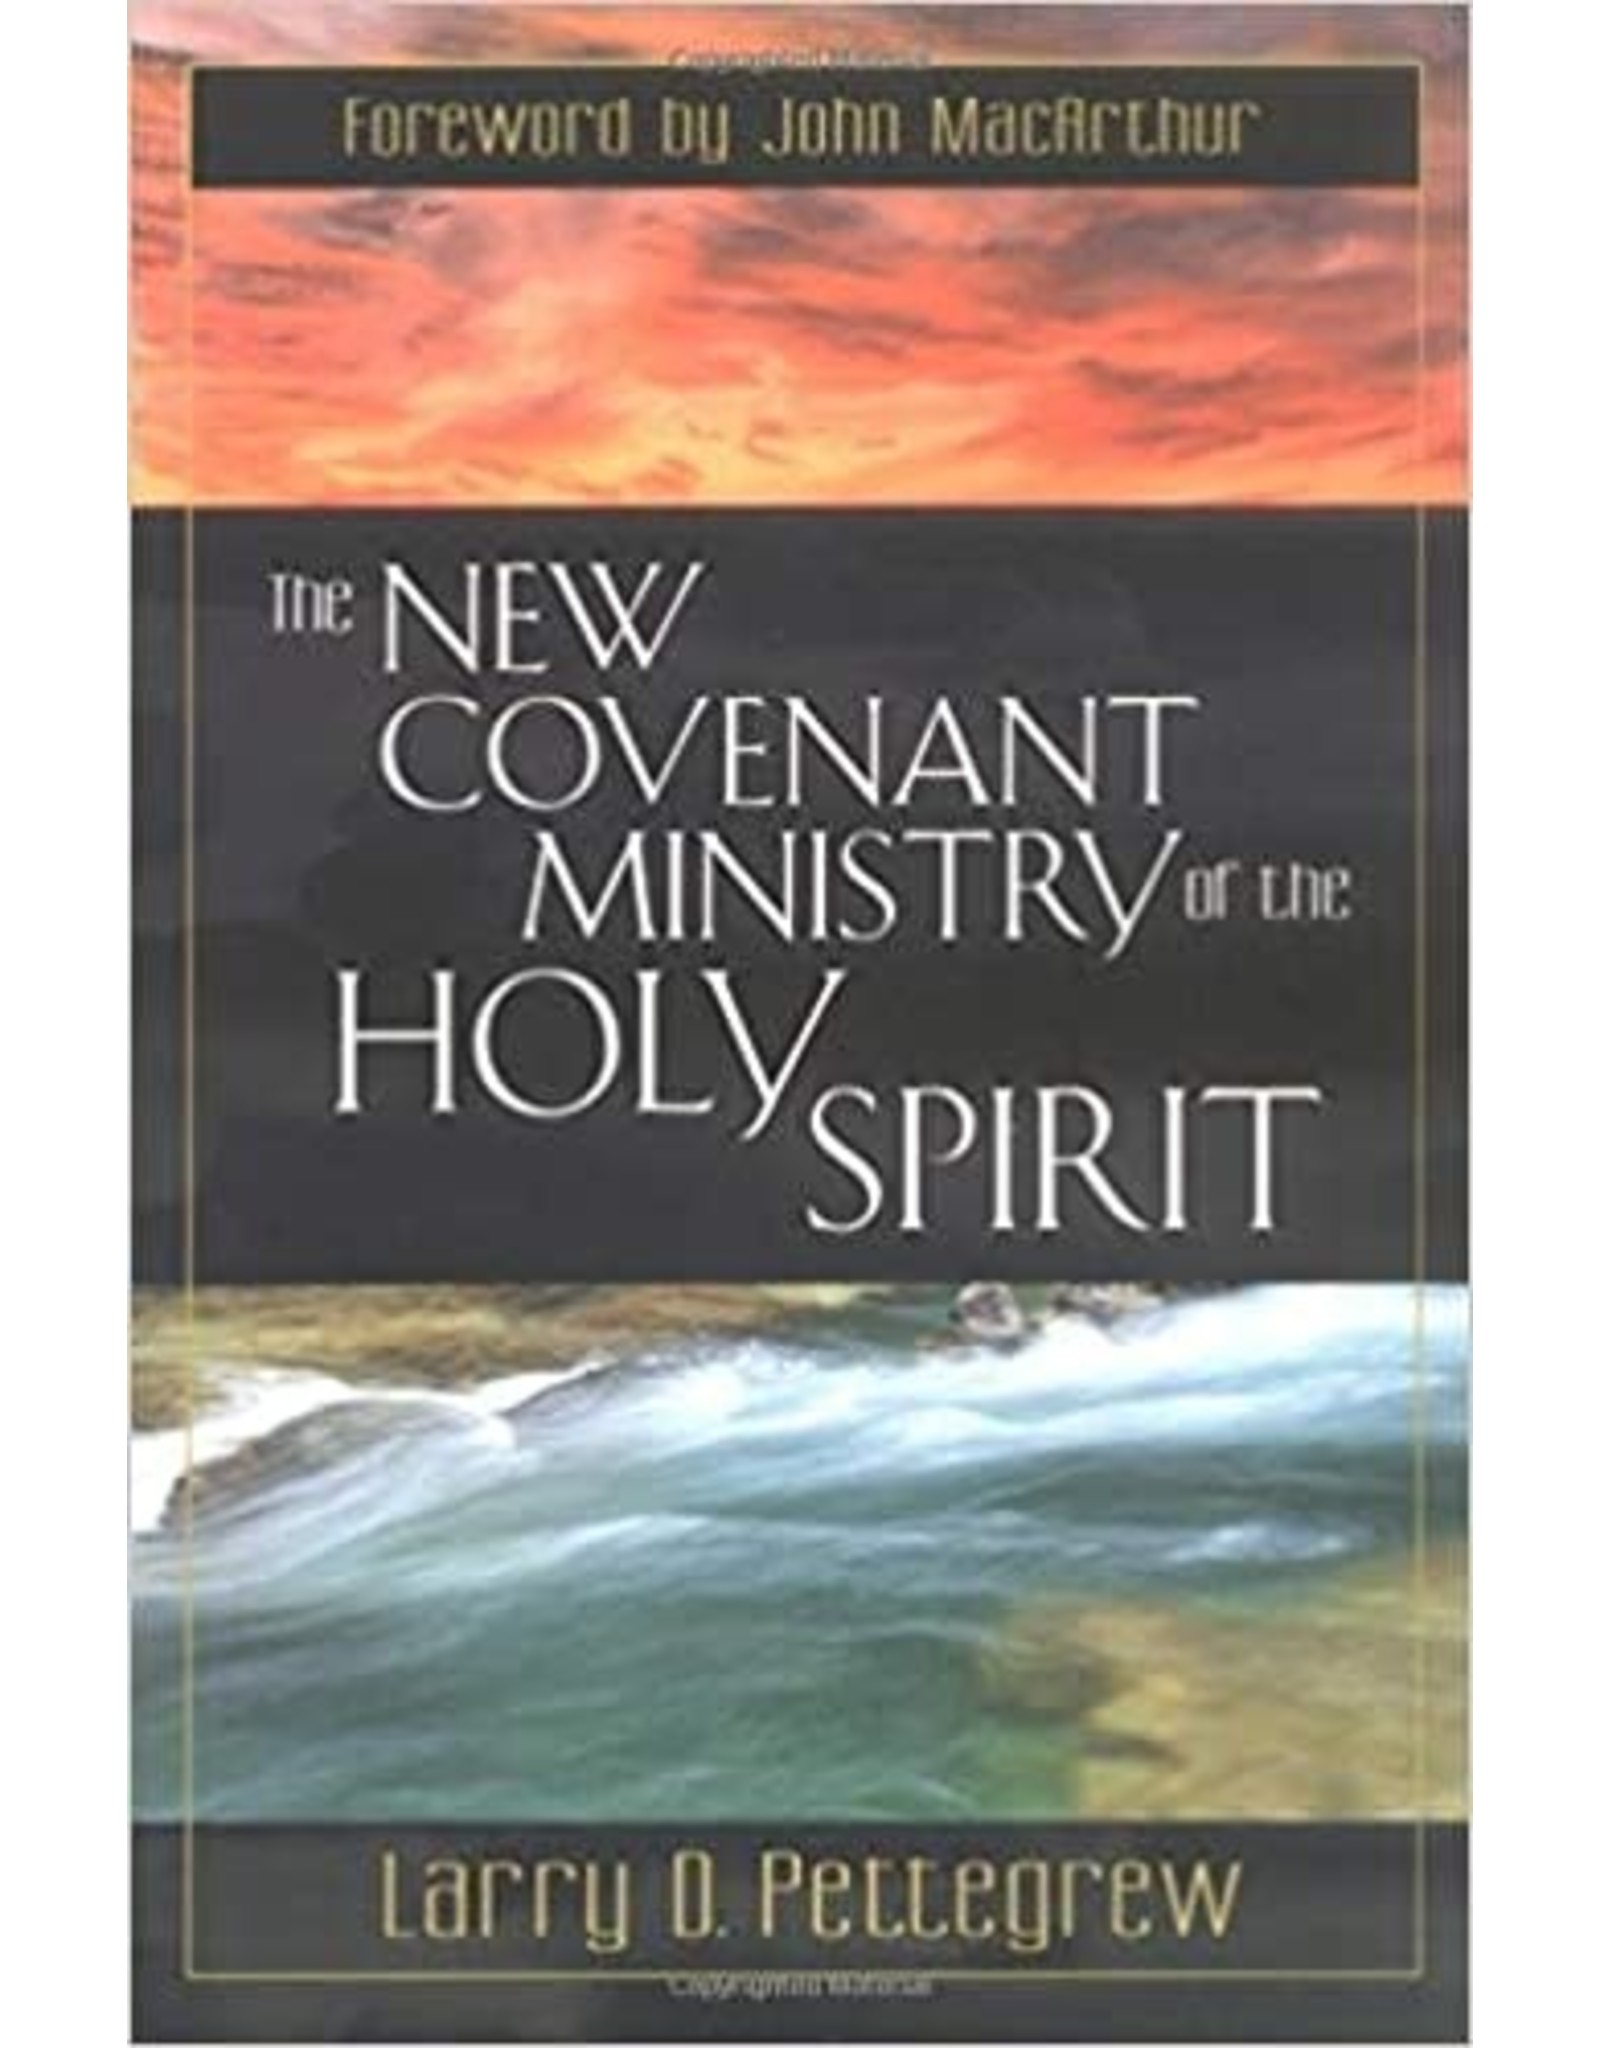 New Covenant Ministry of the Holy Spirit